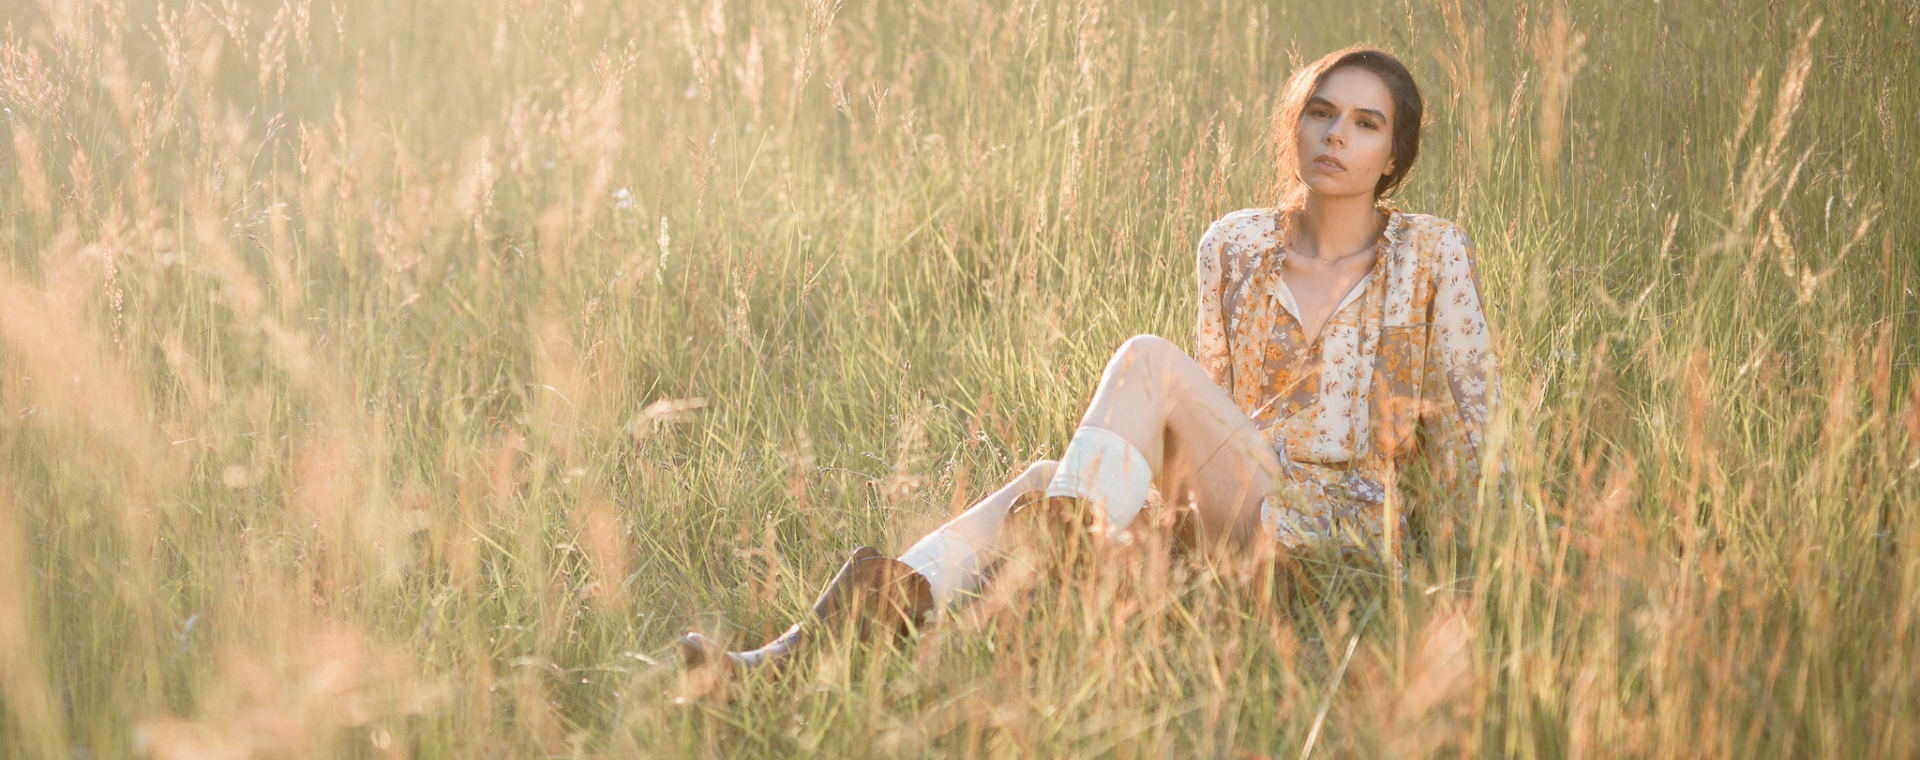 Boho dress yellow patchwork - part of the Melbelle Sunsets & Meadows Collection